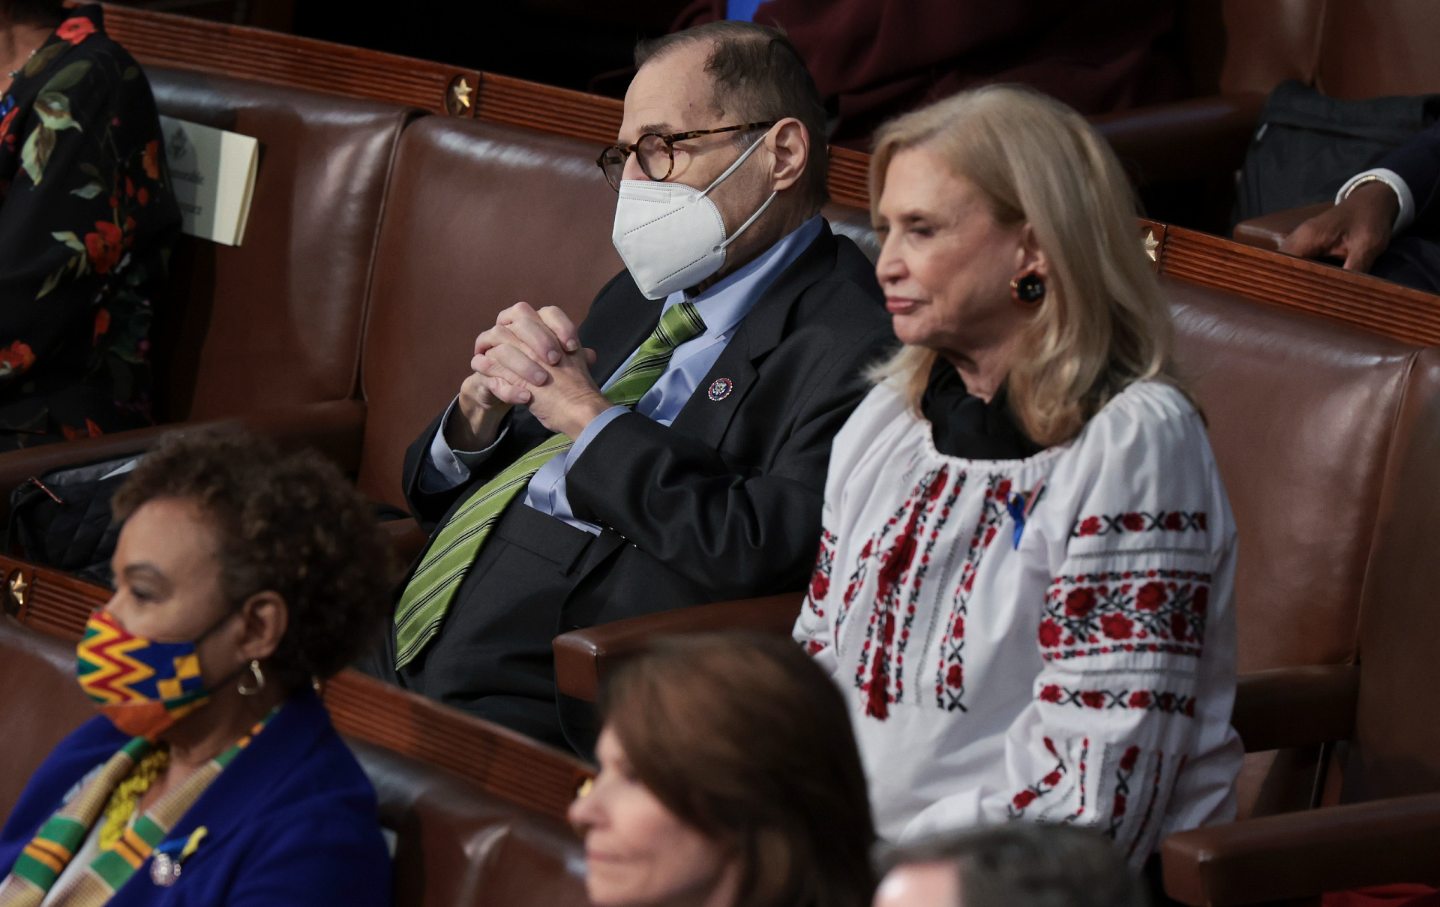 Two congresspeople sit next to each other during President Biden's State of the Union address.